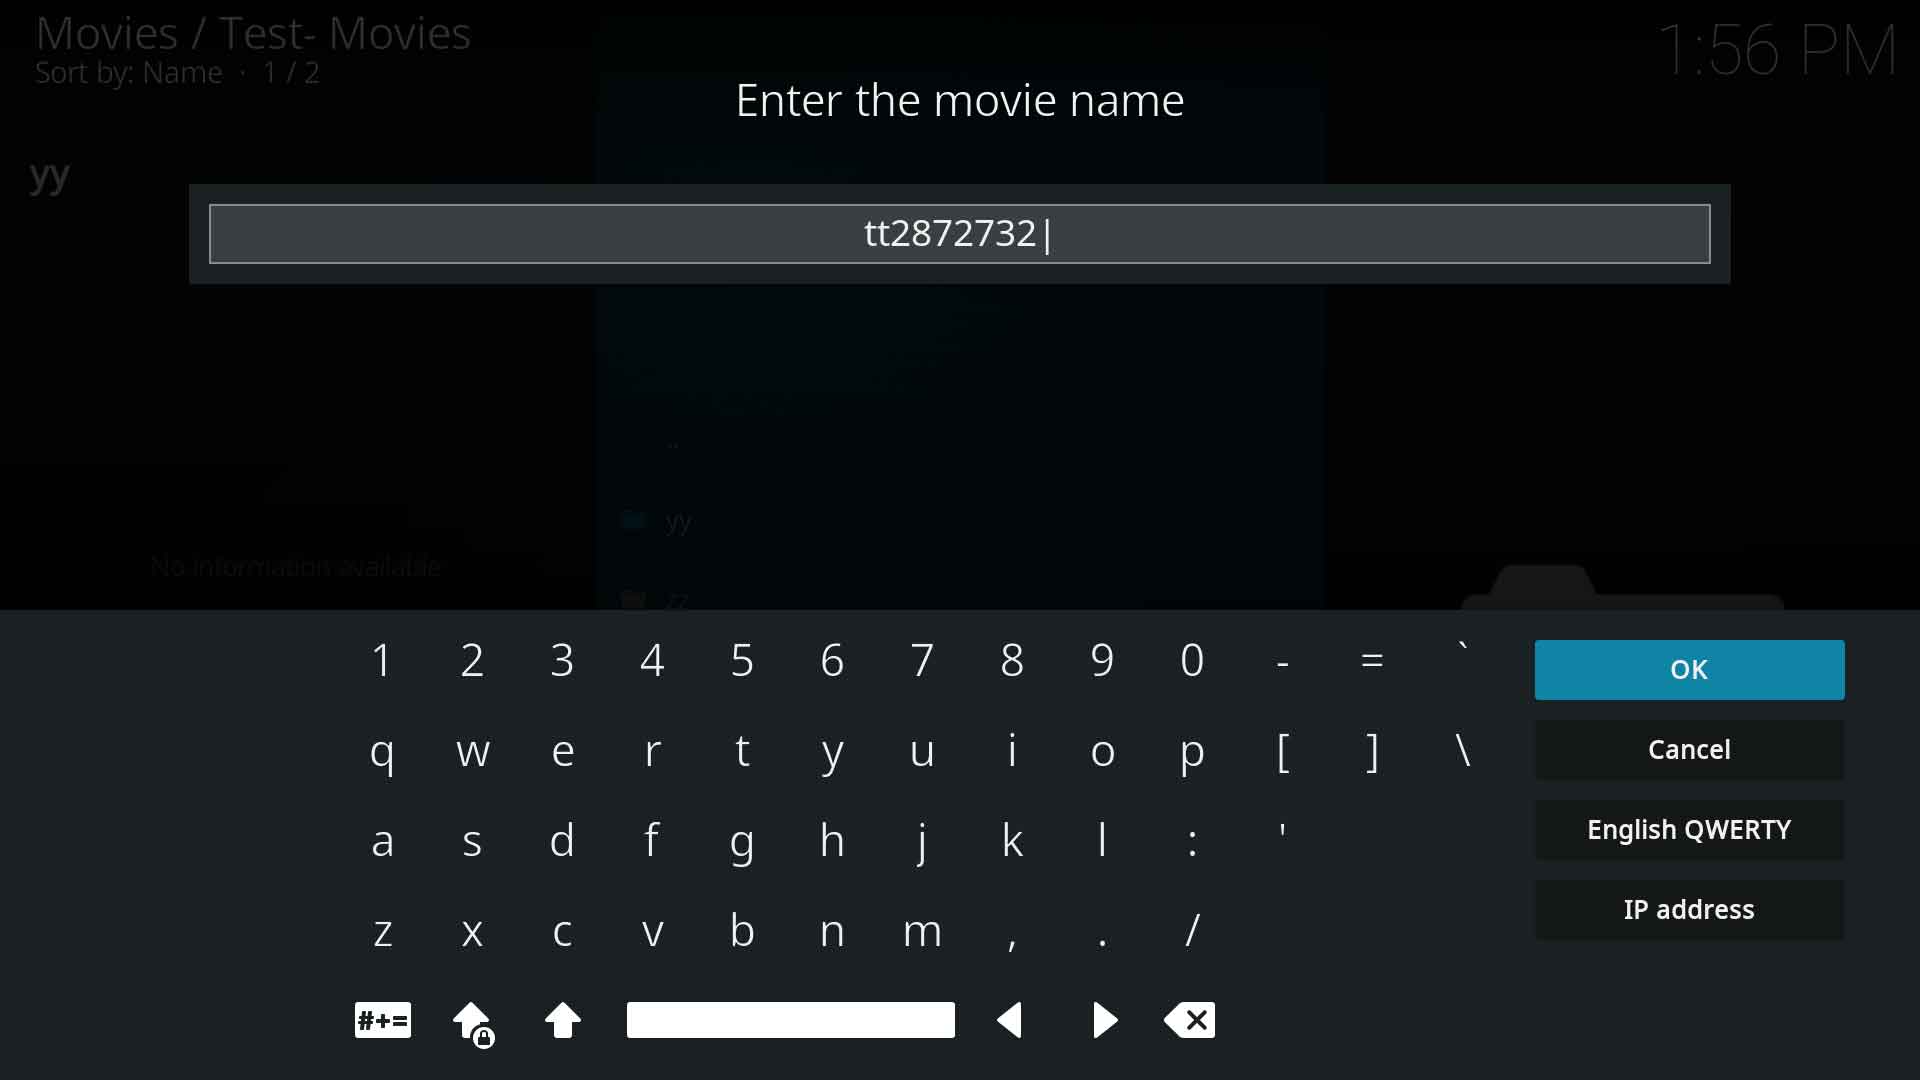 Image 2- If using the IMDB ID, enter it as shown